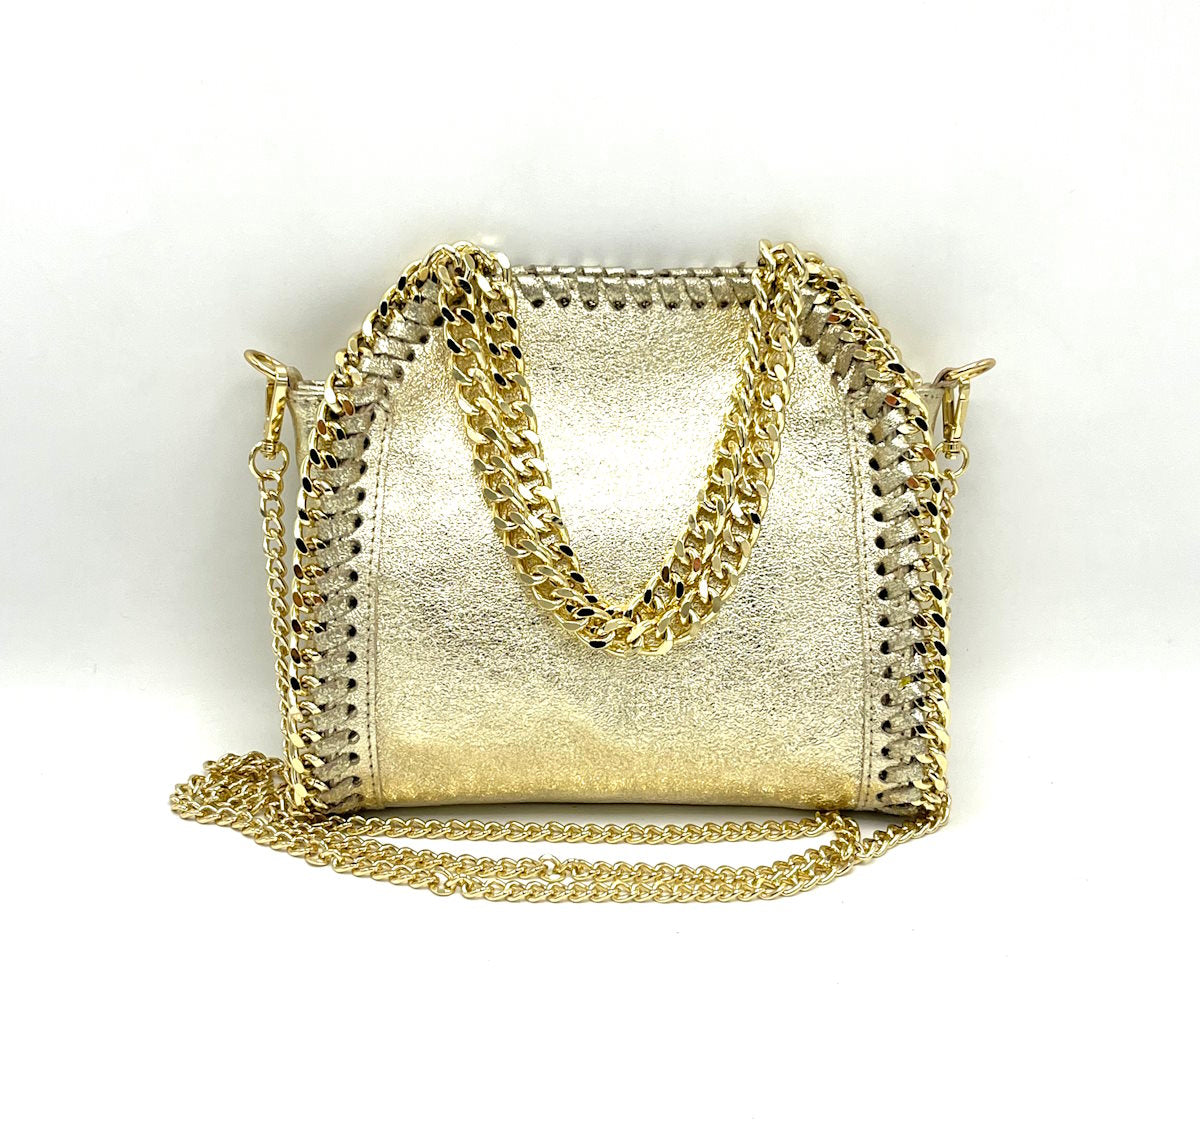 Genuine leather mini chain bag, Made in Italy, art. 112465